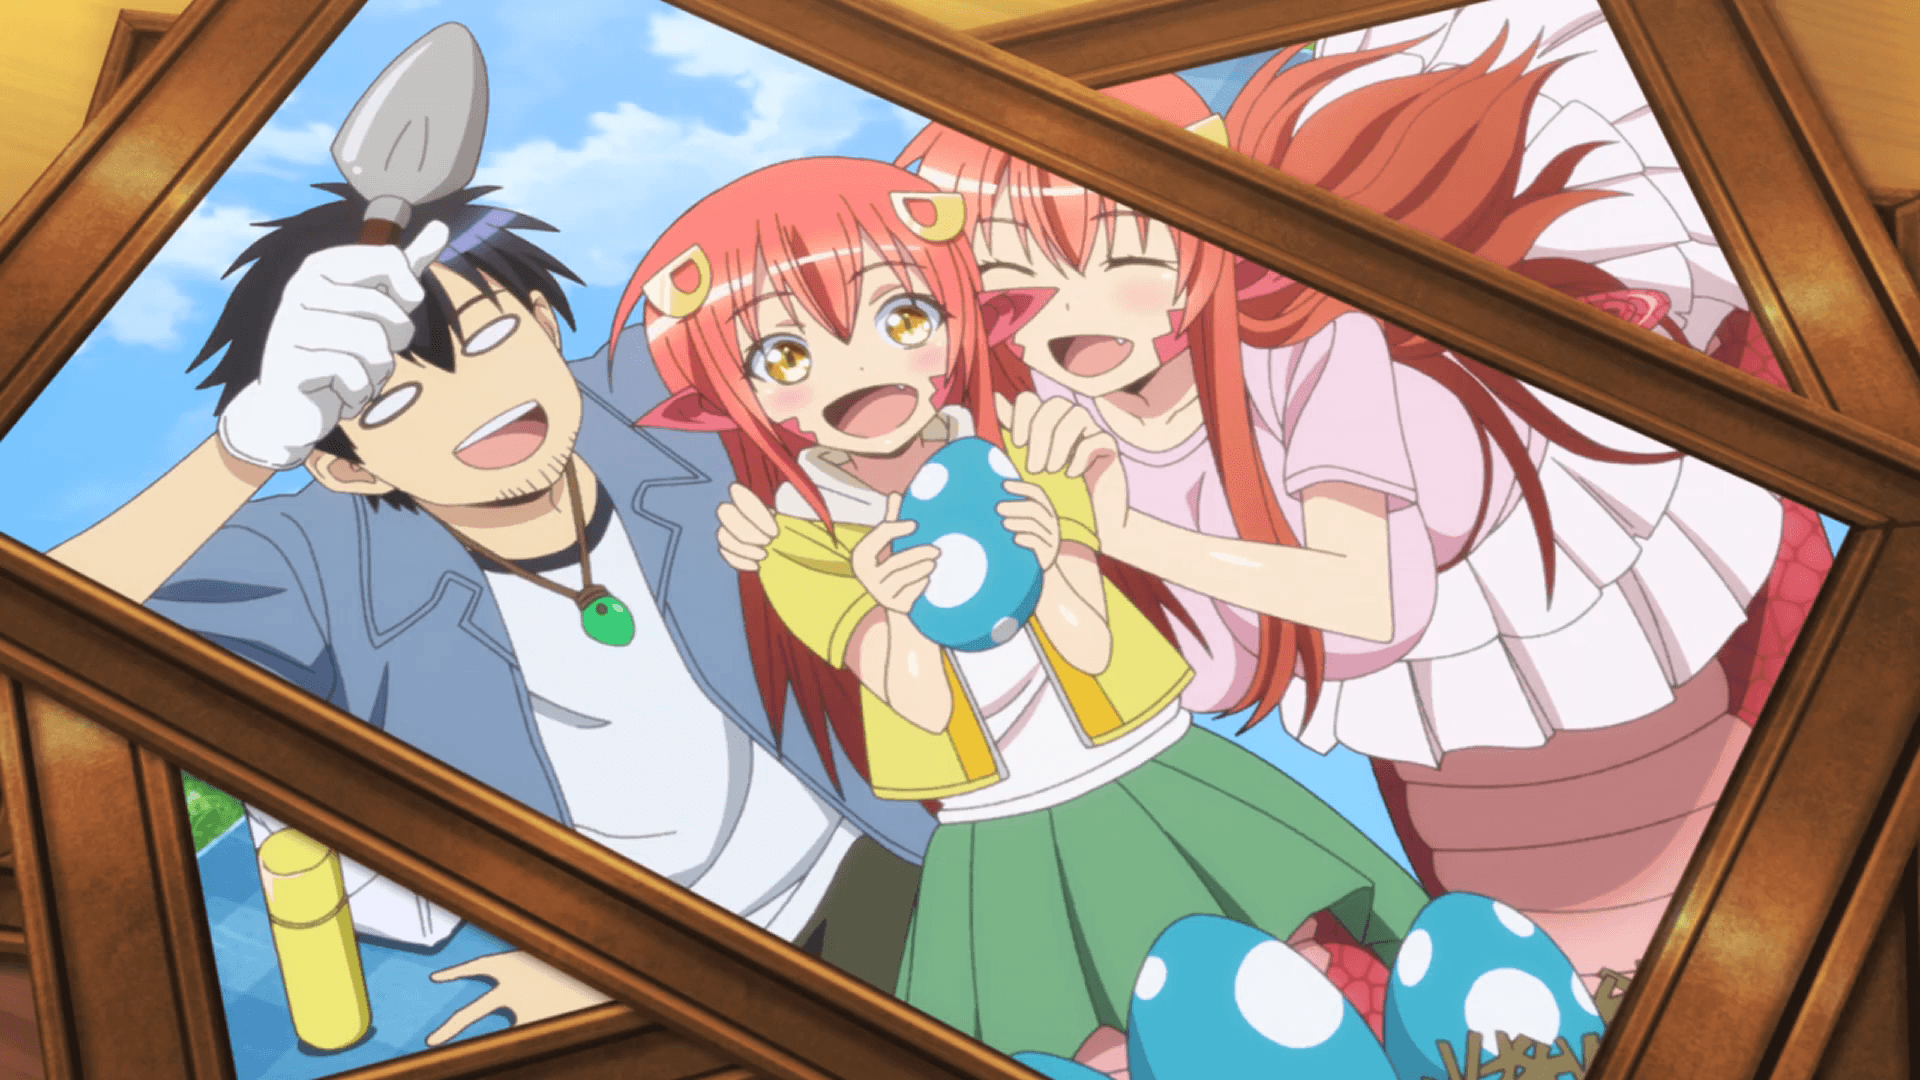 Searching for eggs. Monster Musume / Daily Life with Monster Girl